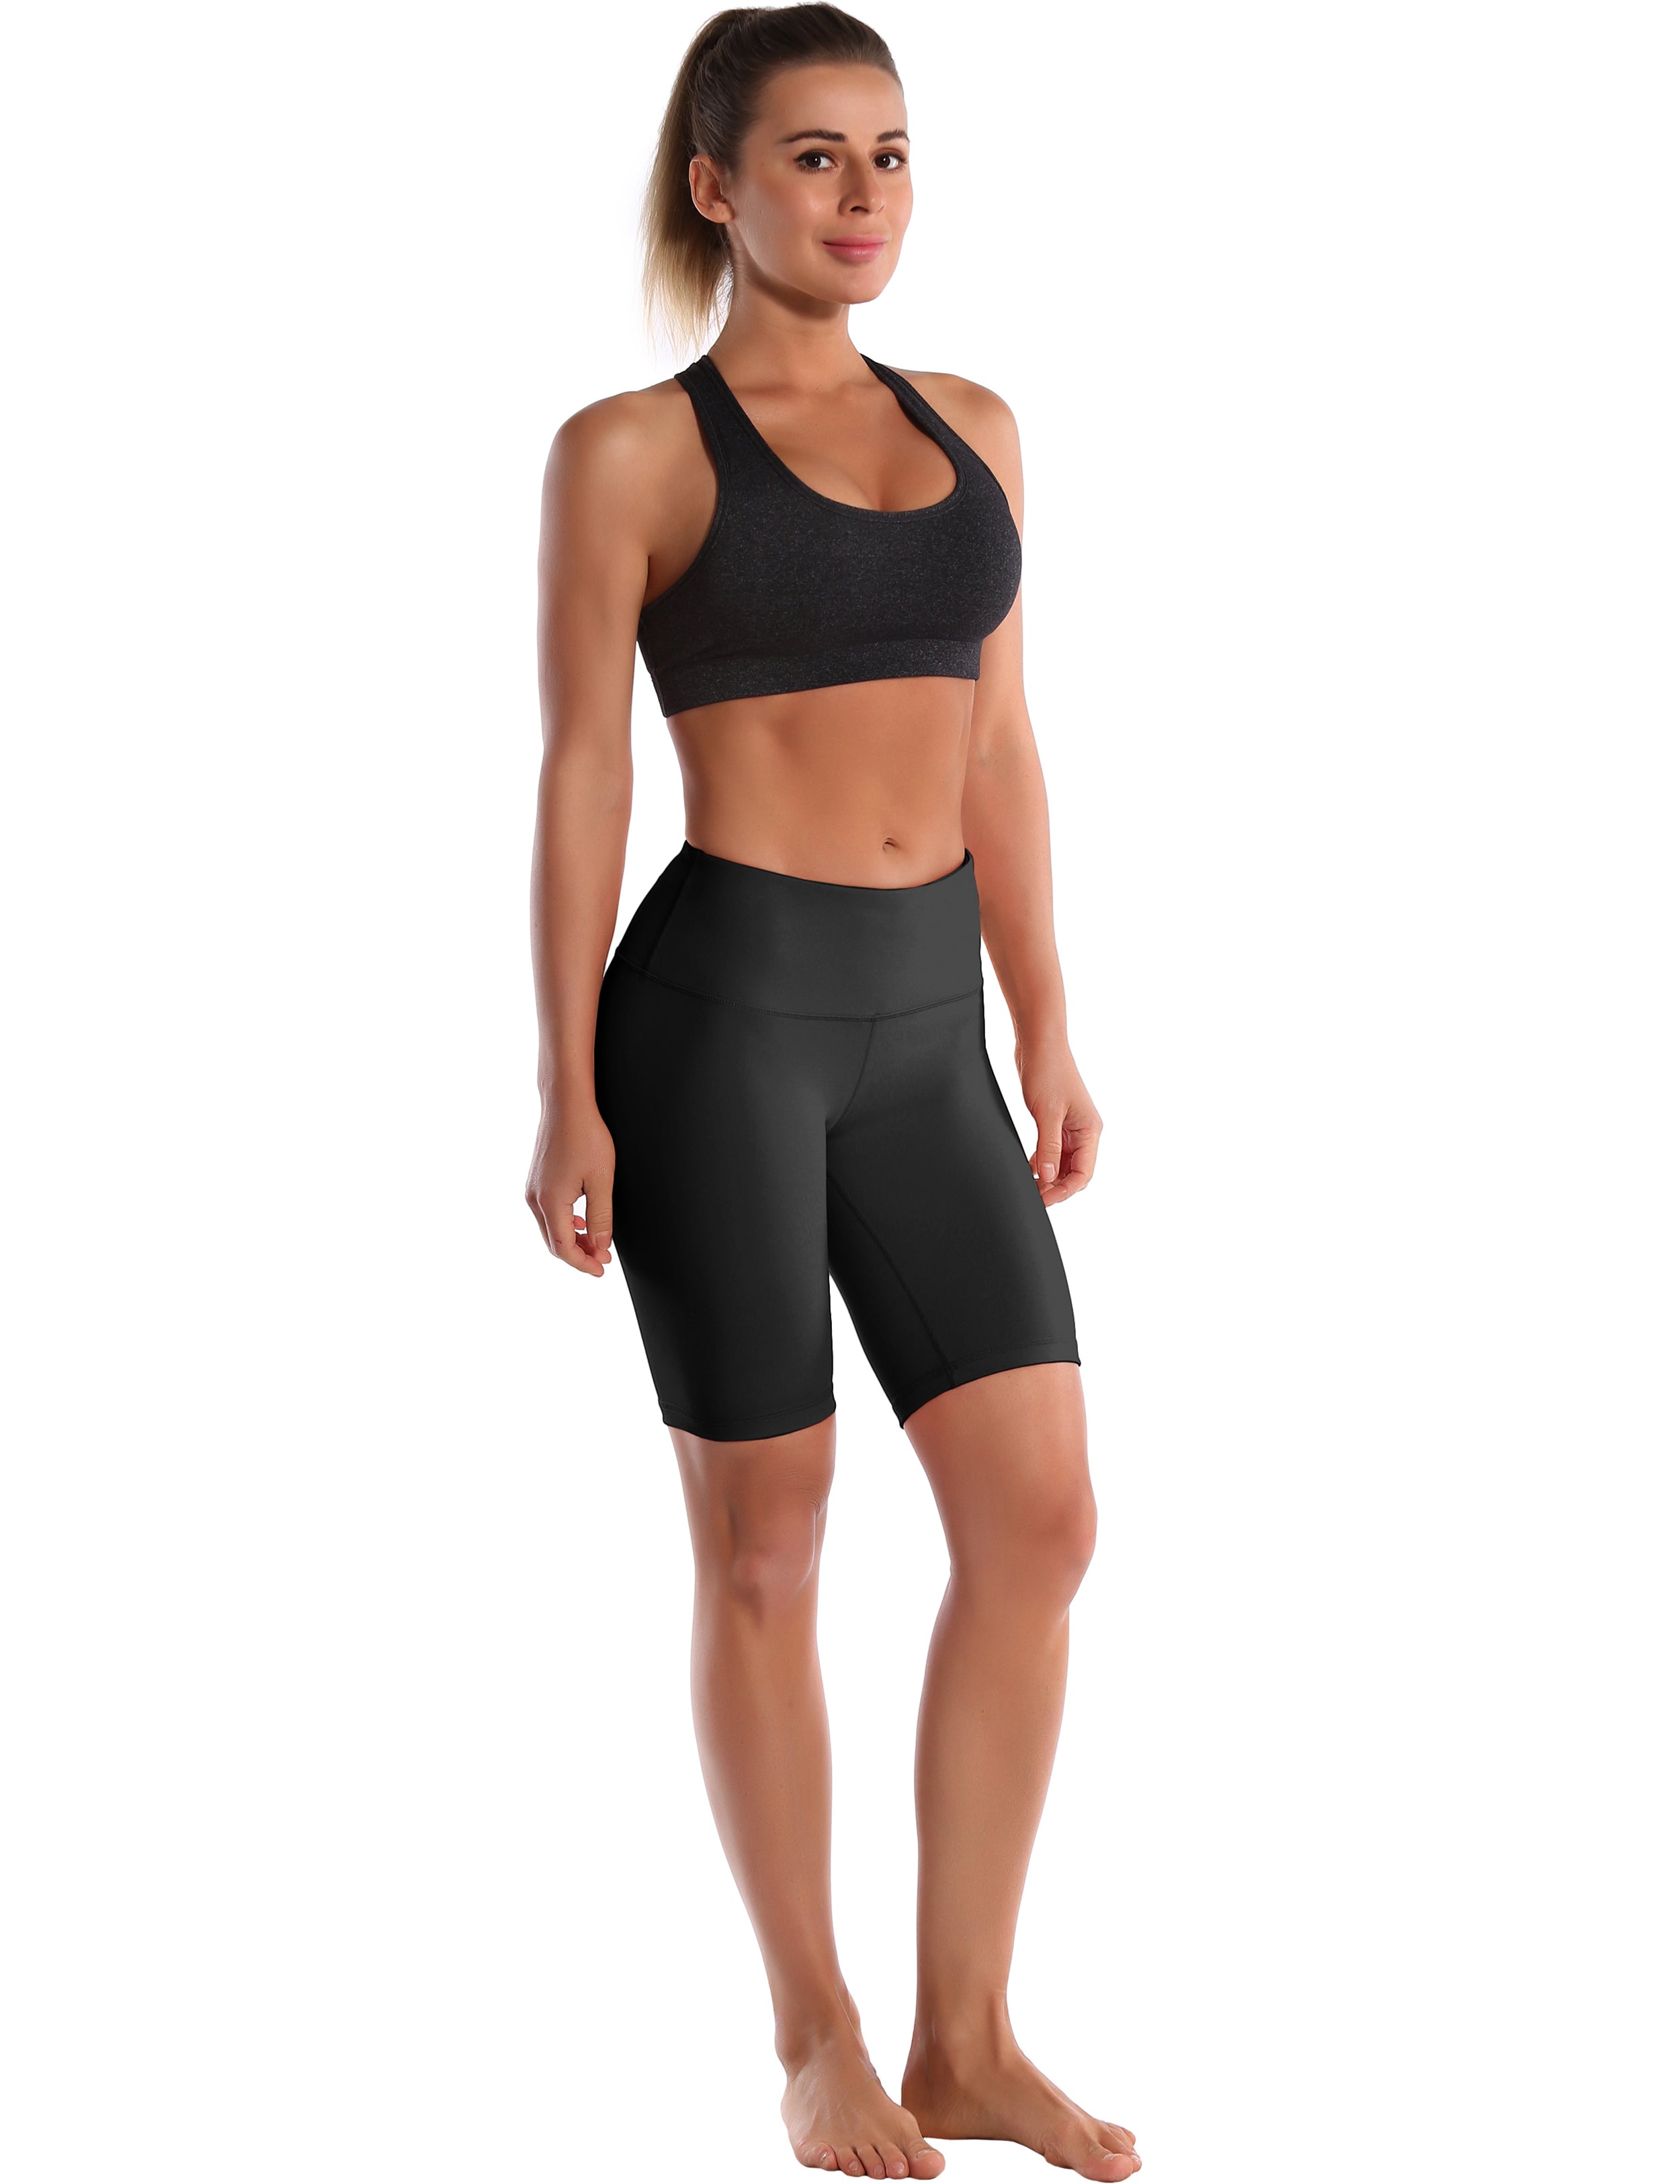 8" High Waist Running Shorts black Sleek, soft, smooth and totally comfortable: our newest style is here. Softest-ever fabric High elasticity High density 4-way stretch Fabric doesn't attract lint easily No see-through Moisture-wicking Machine wash 75% Nylon, 25% Spandex